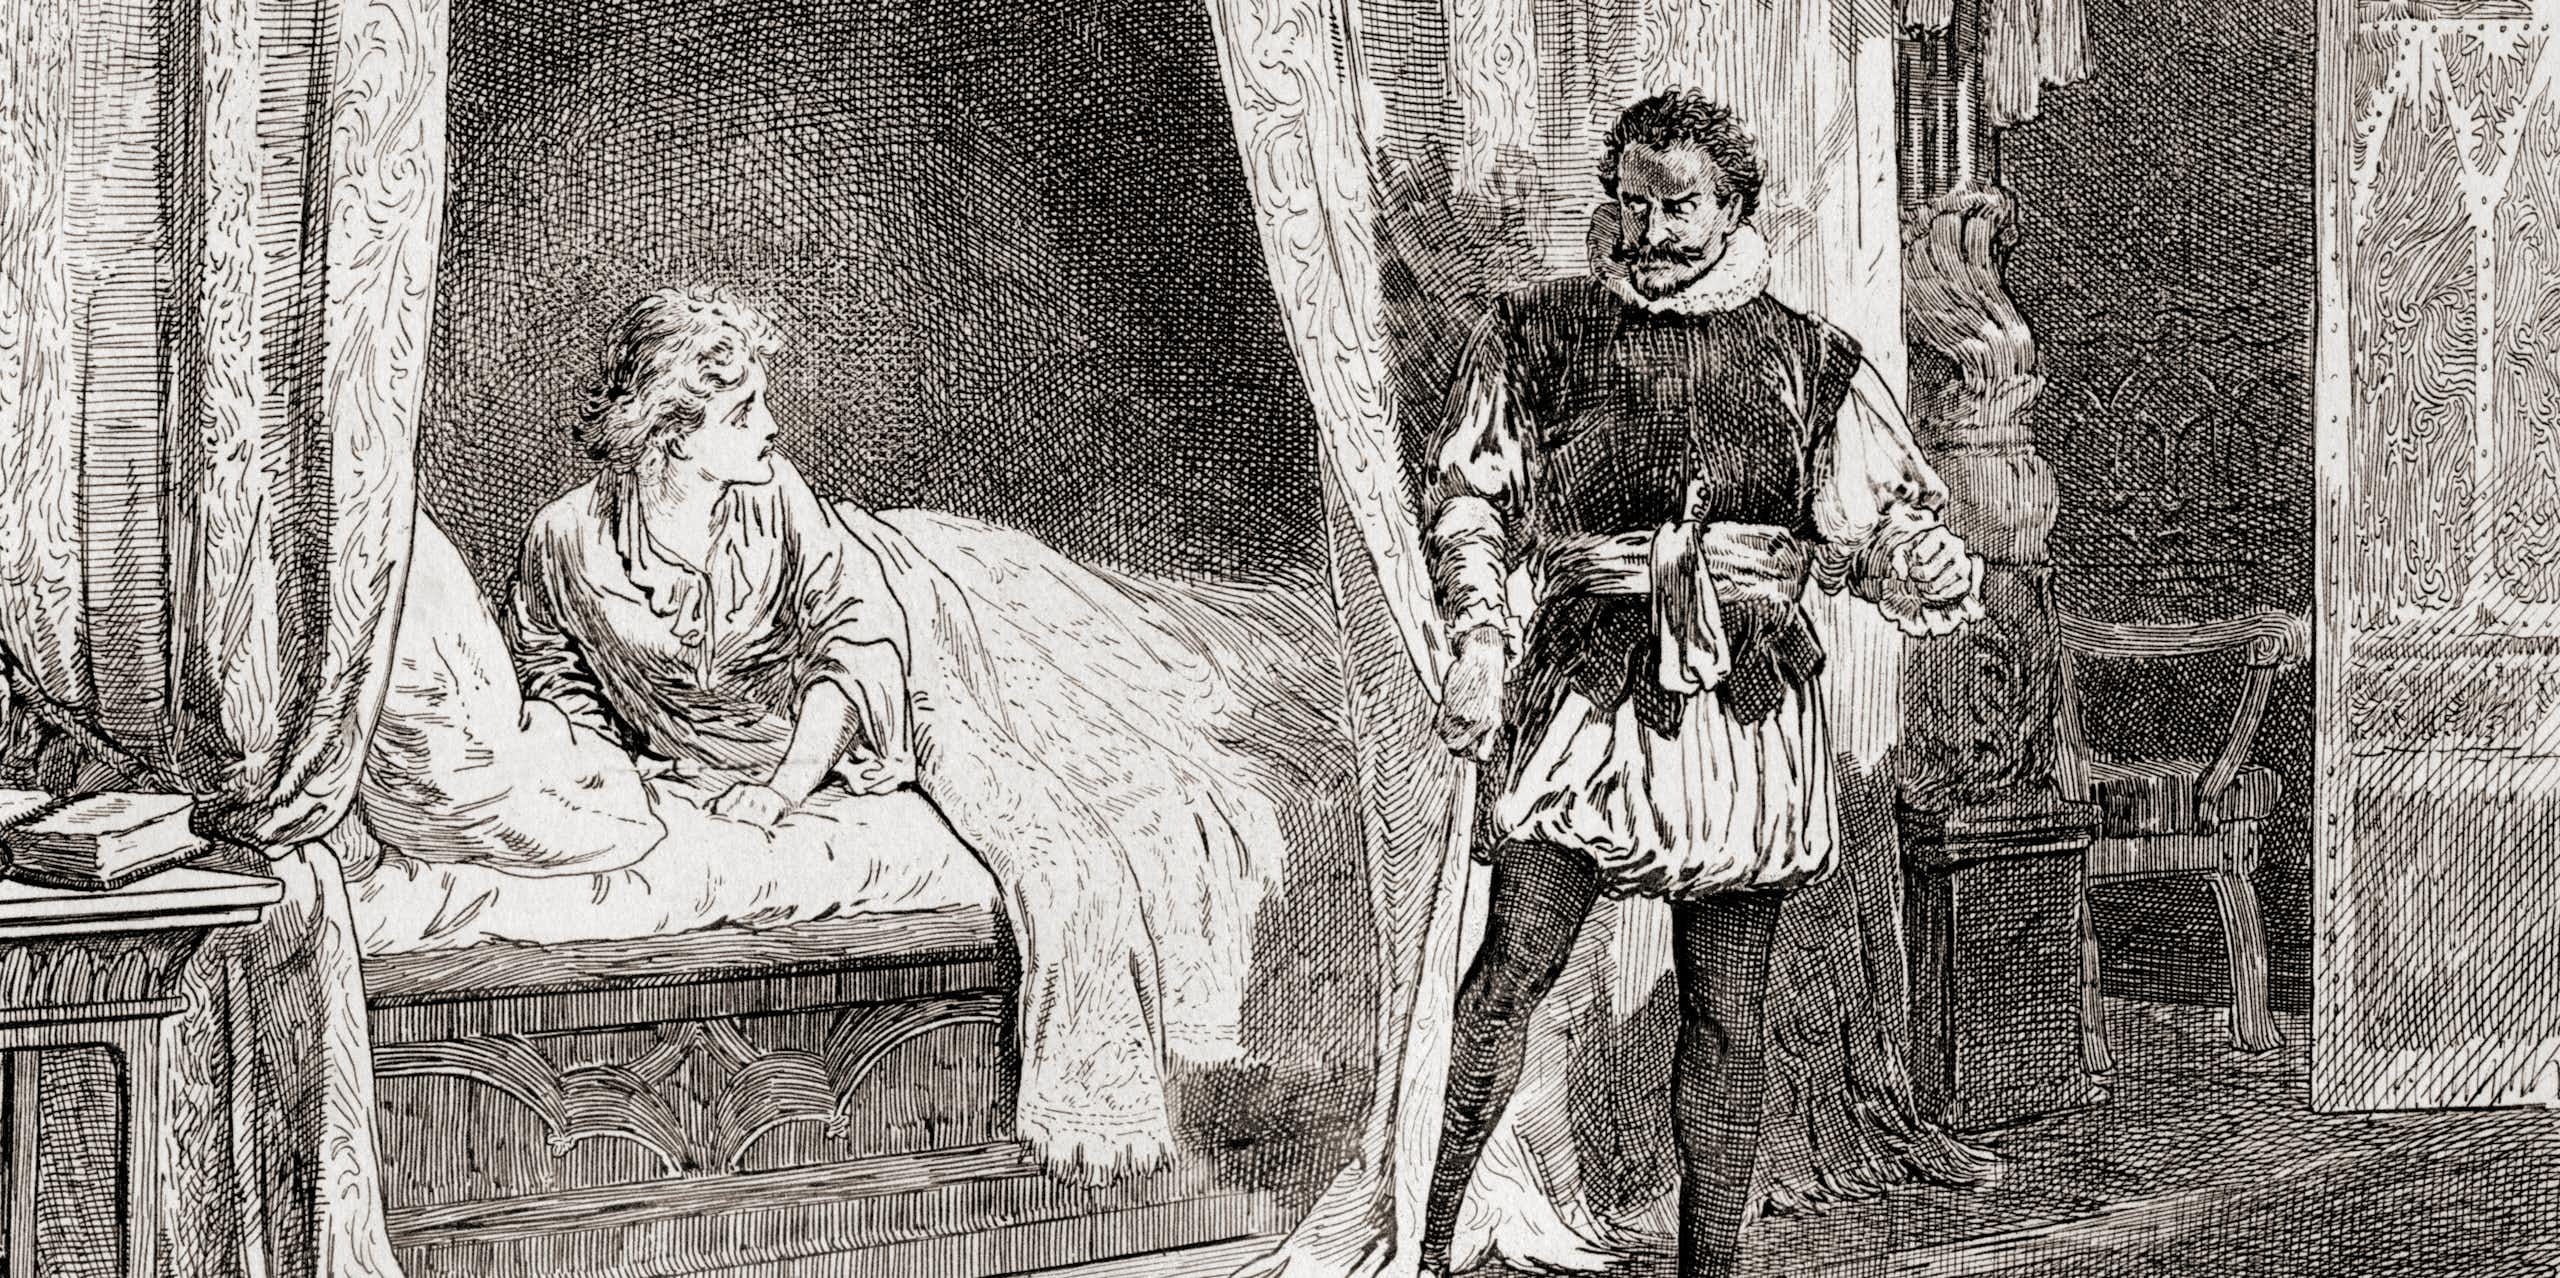 A white woman lies in bed as a Black man stands near her. 